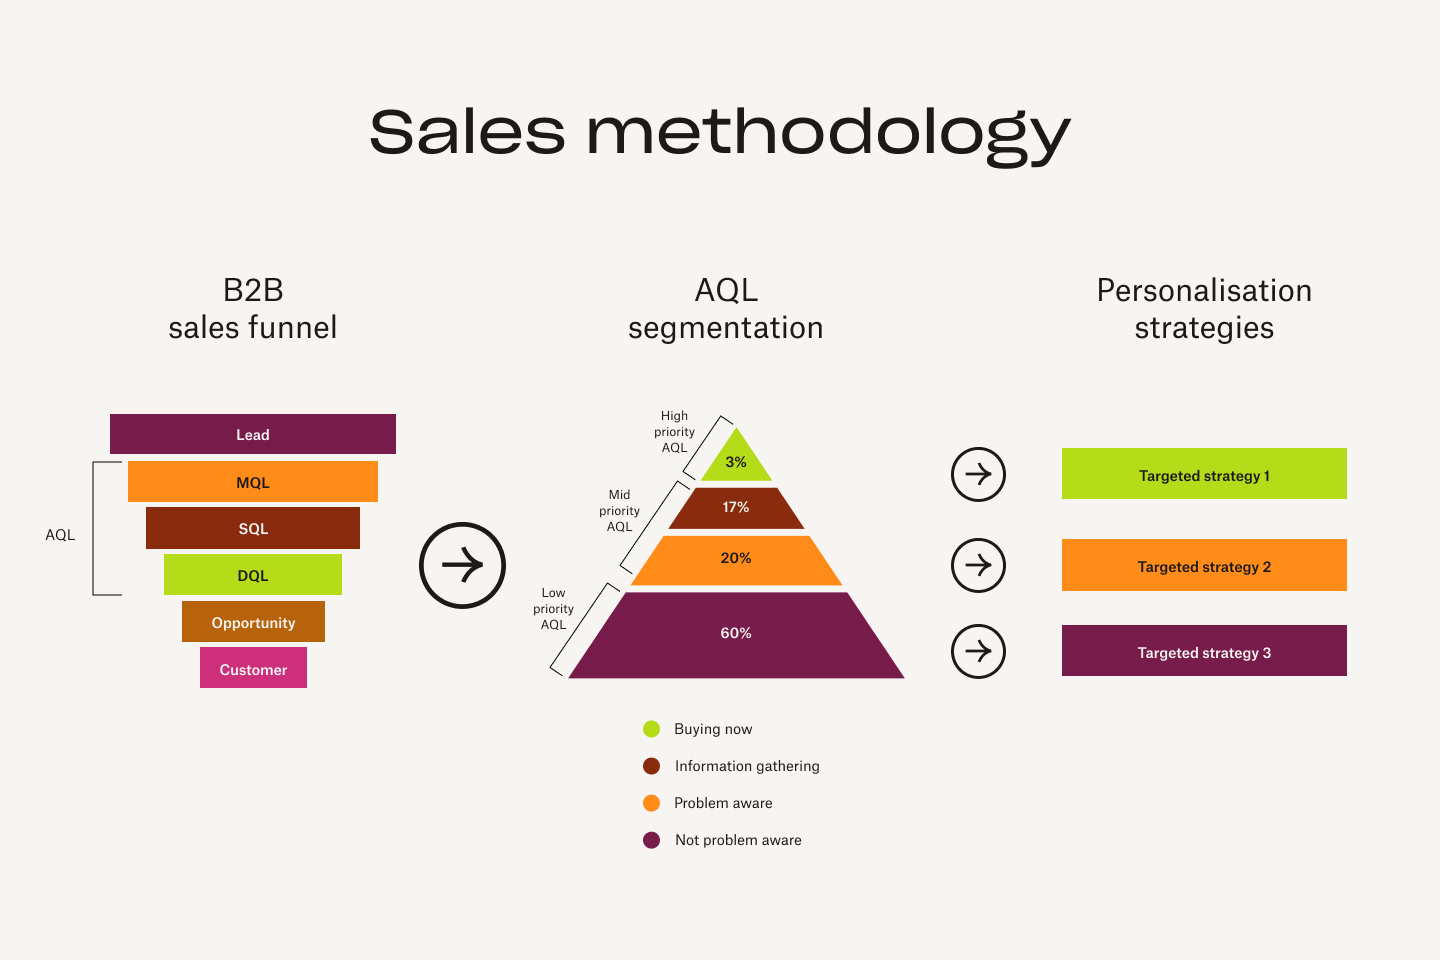 A sales methodology outline which shows how leads pass from B2B sales funnel to AQL segmentation and then to their personalisation strategies